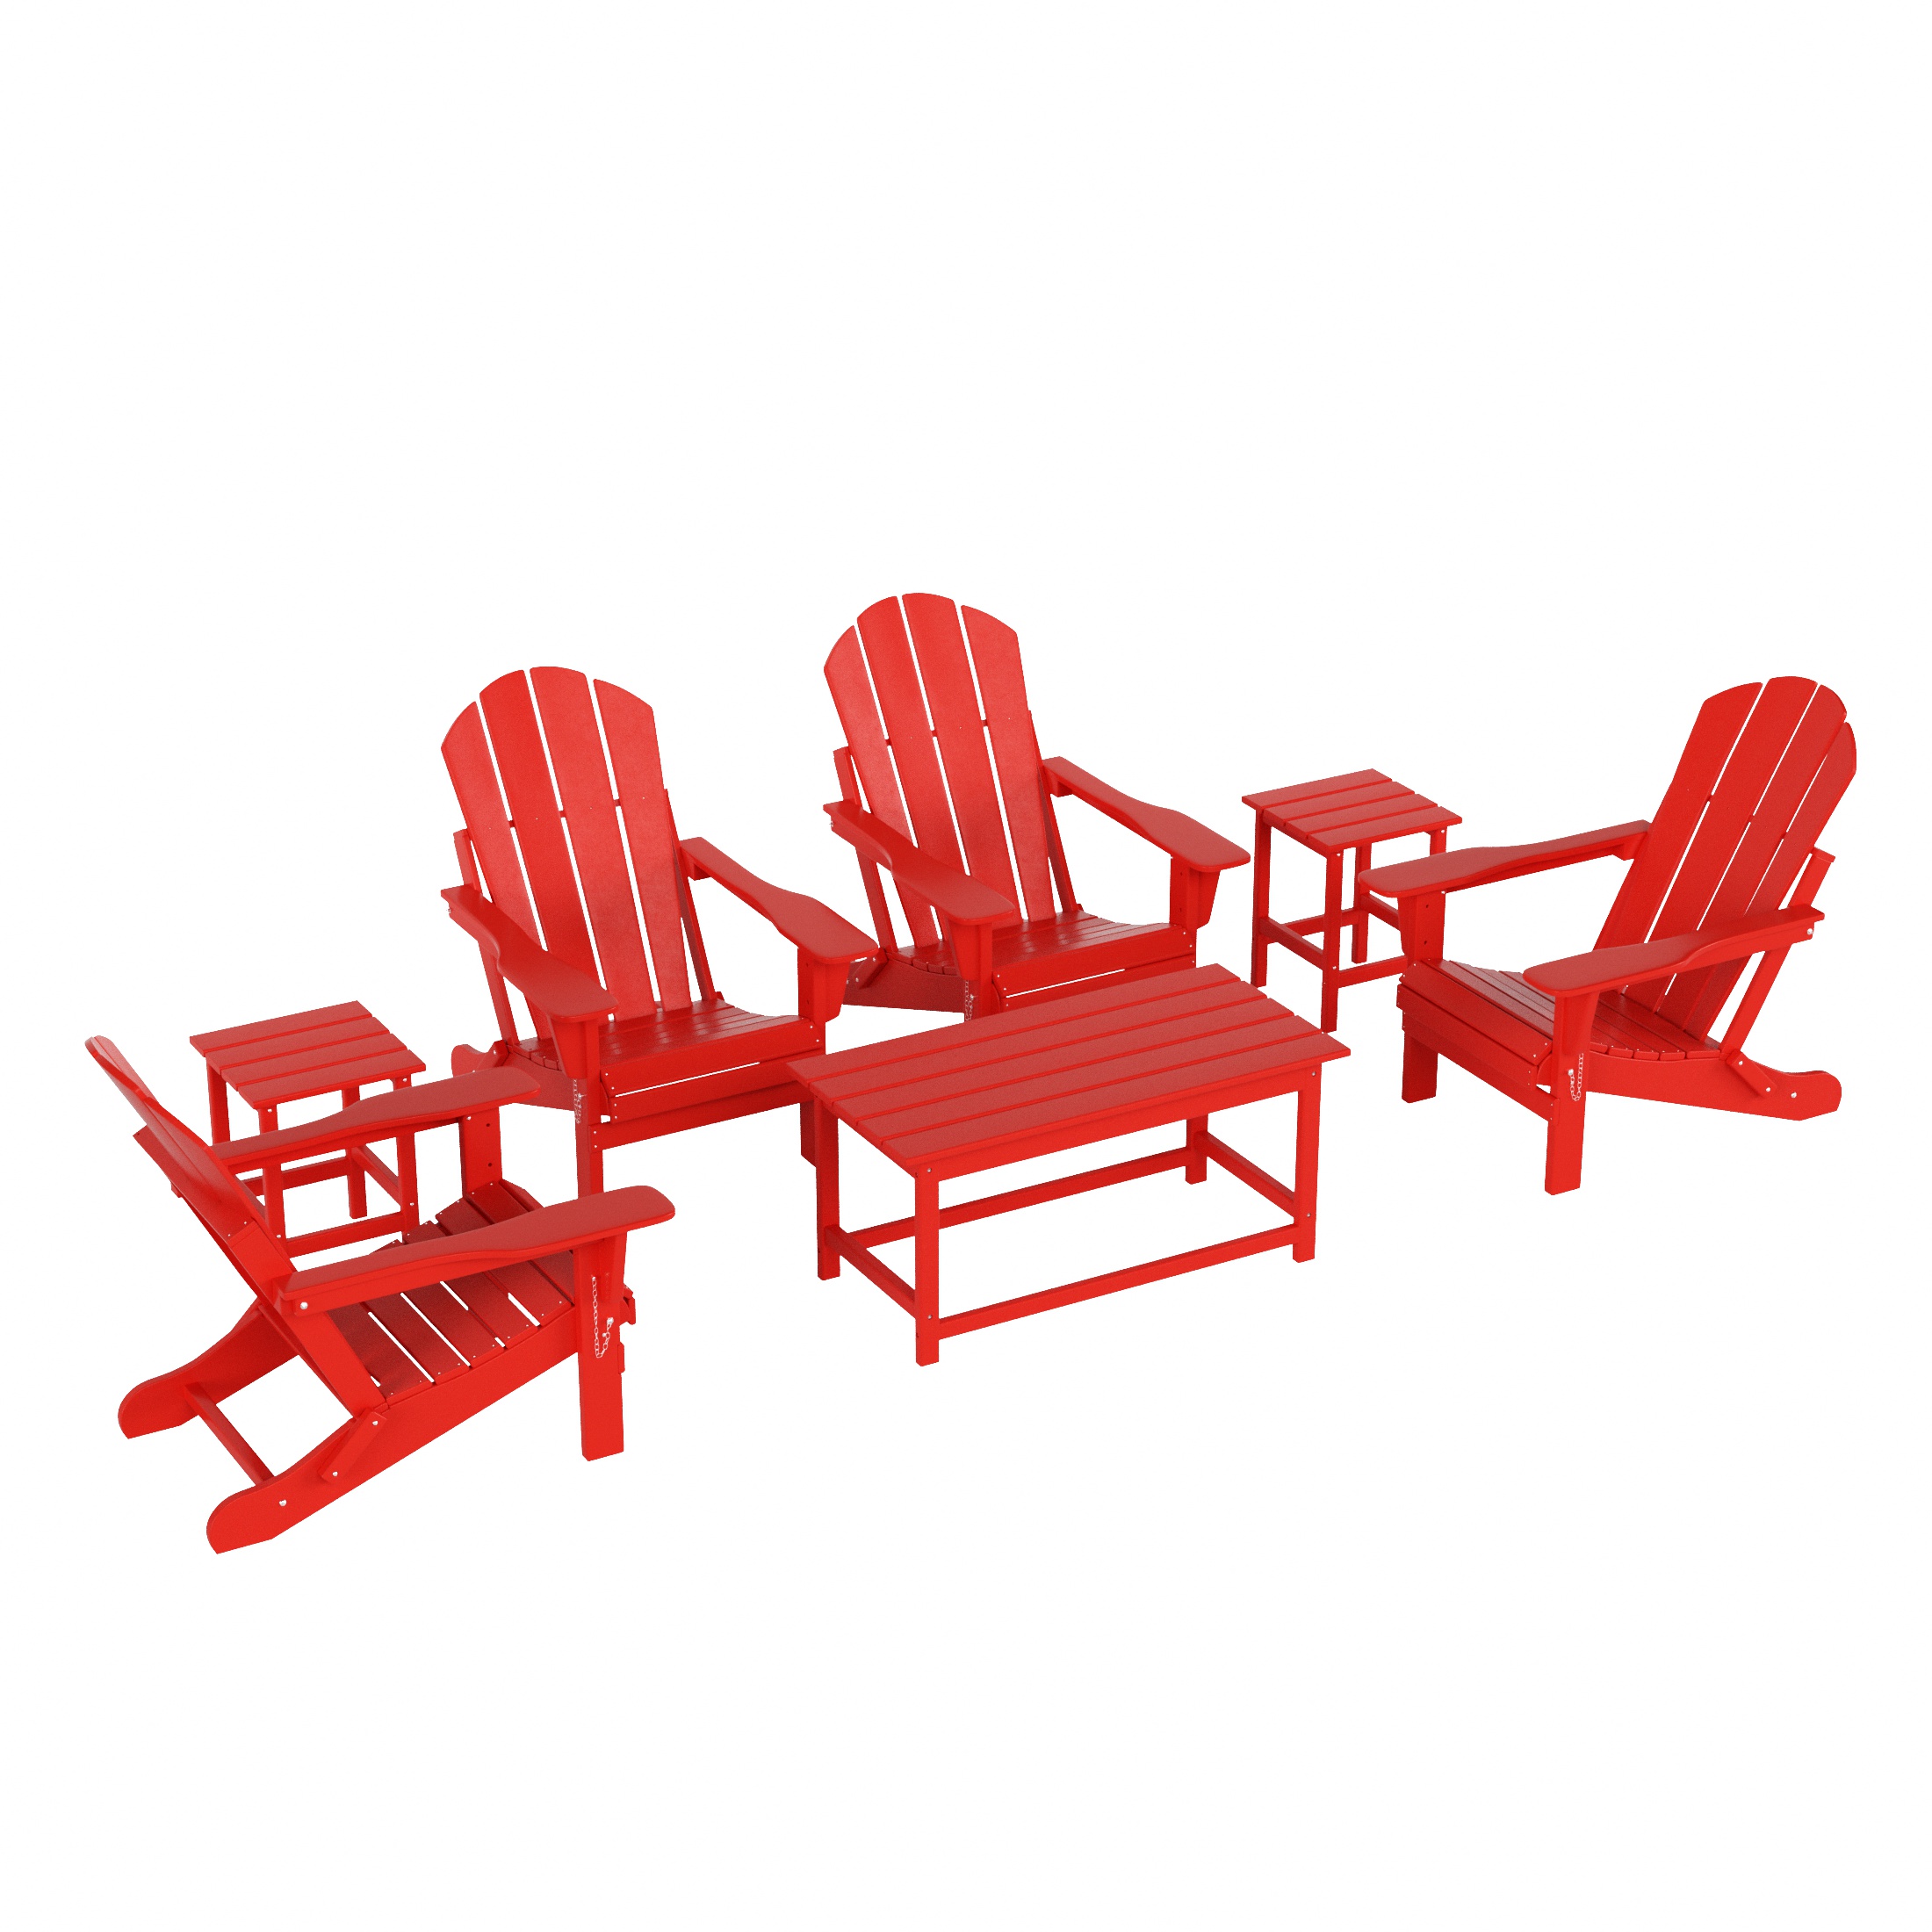 WestinTrends Malibu 7-Pieces Outdoor Patio Furniture Set, All Weather Outdoor Seating Plastic Adirondack Chair Set of 4, Coffee Table and 2 Side Table, Red - image 1 of 7